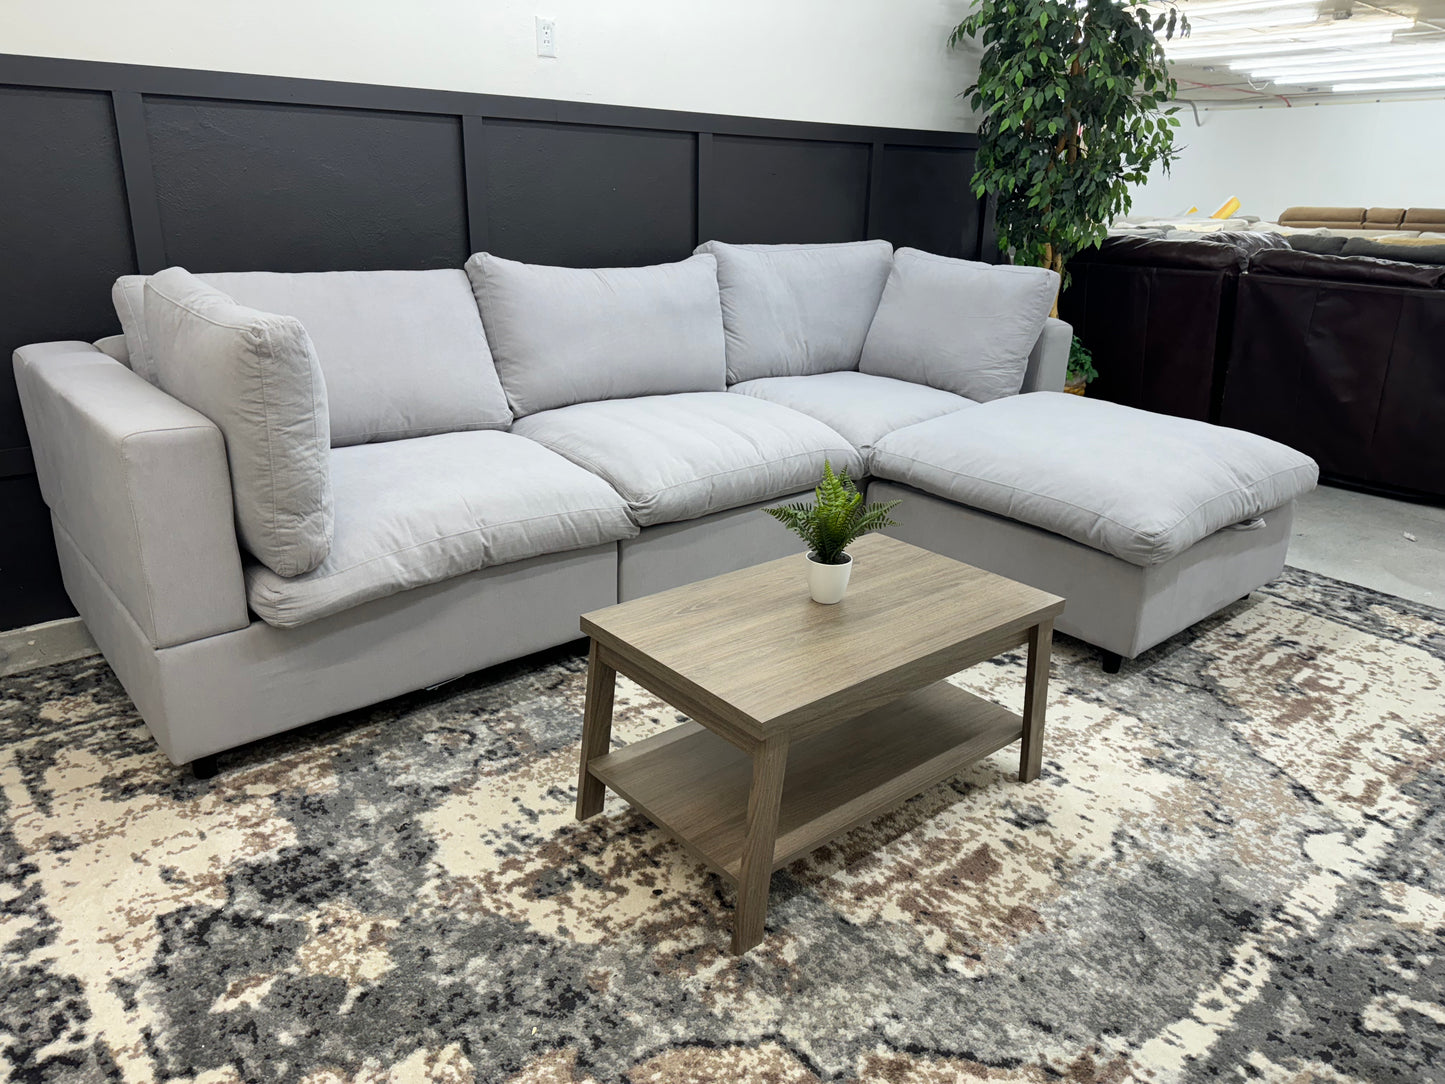 BRAND NEW Light Gray Modular Sectional Cloud Couch